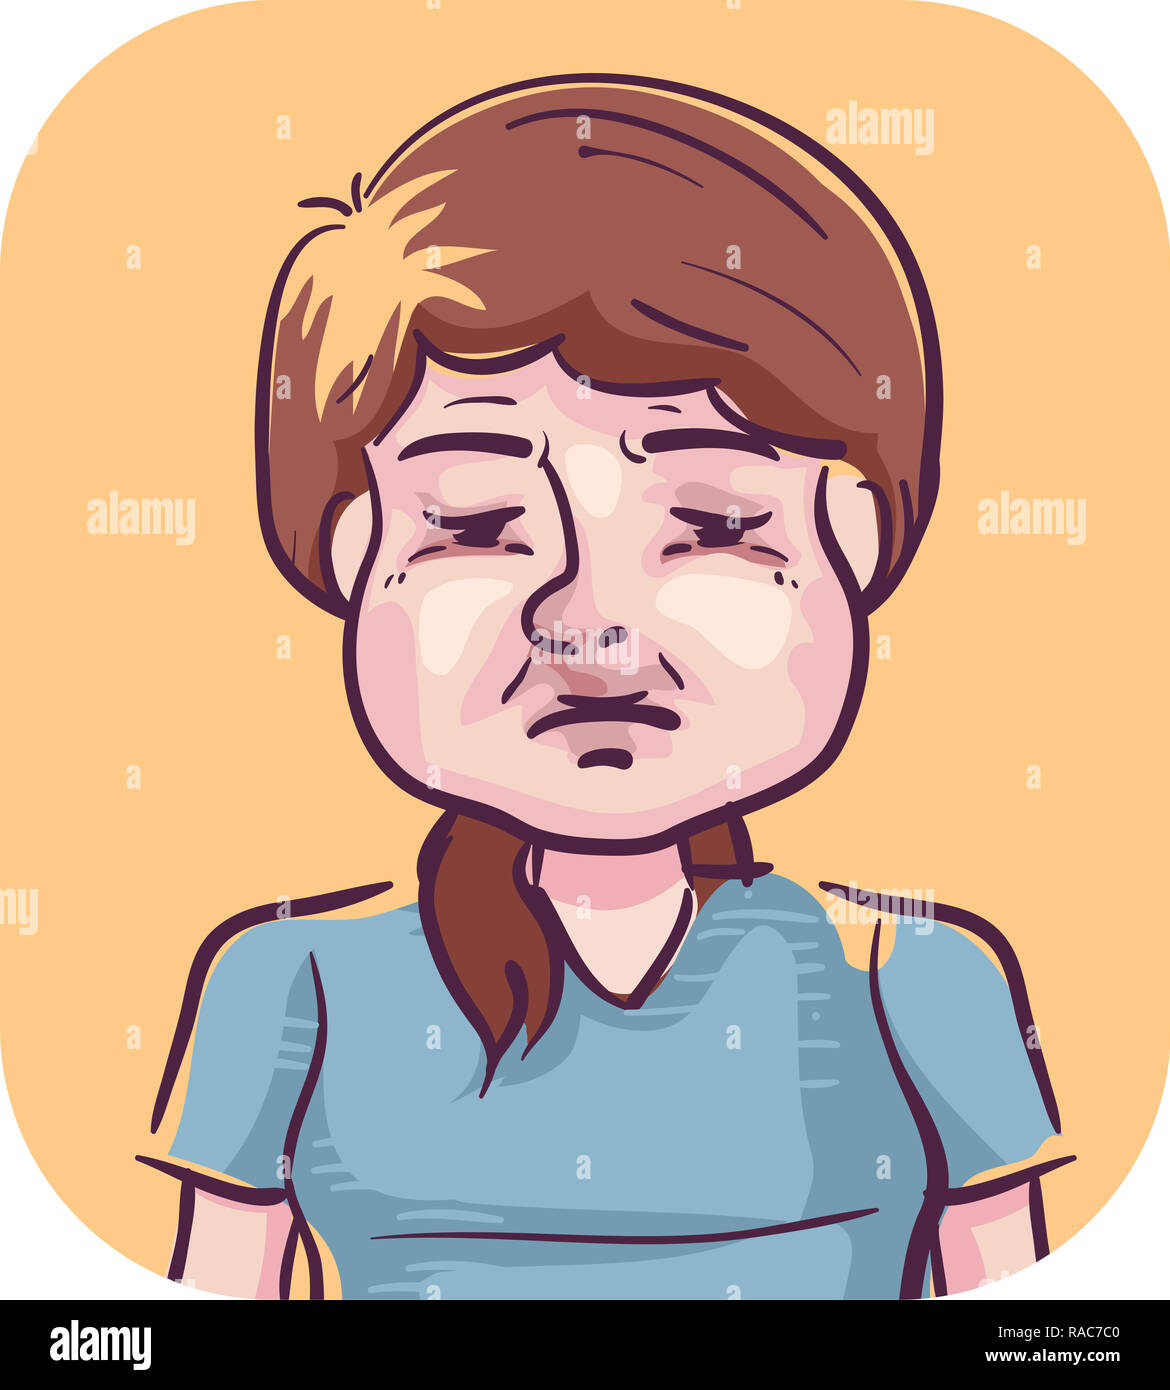 Illustration of a Girl with a Swollen Face Stock Photo